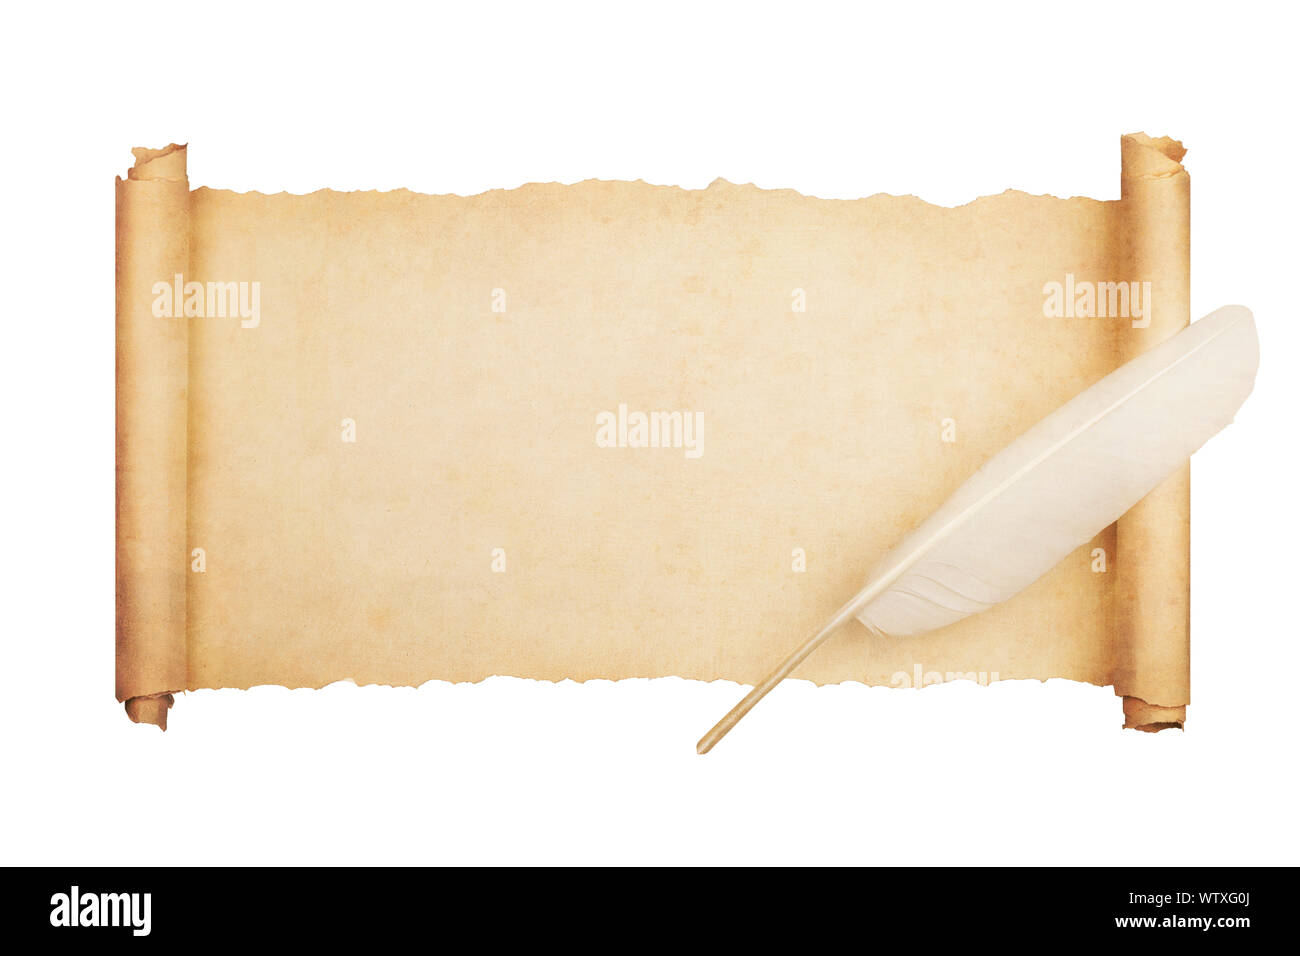 Vintage blank paper scroll isolated on white background with feather. Stock Photo